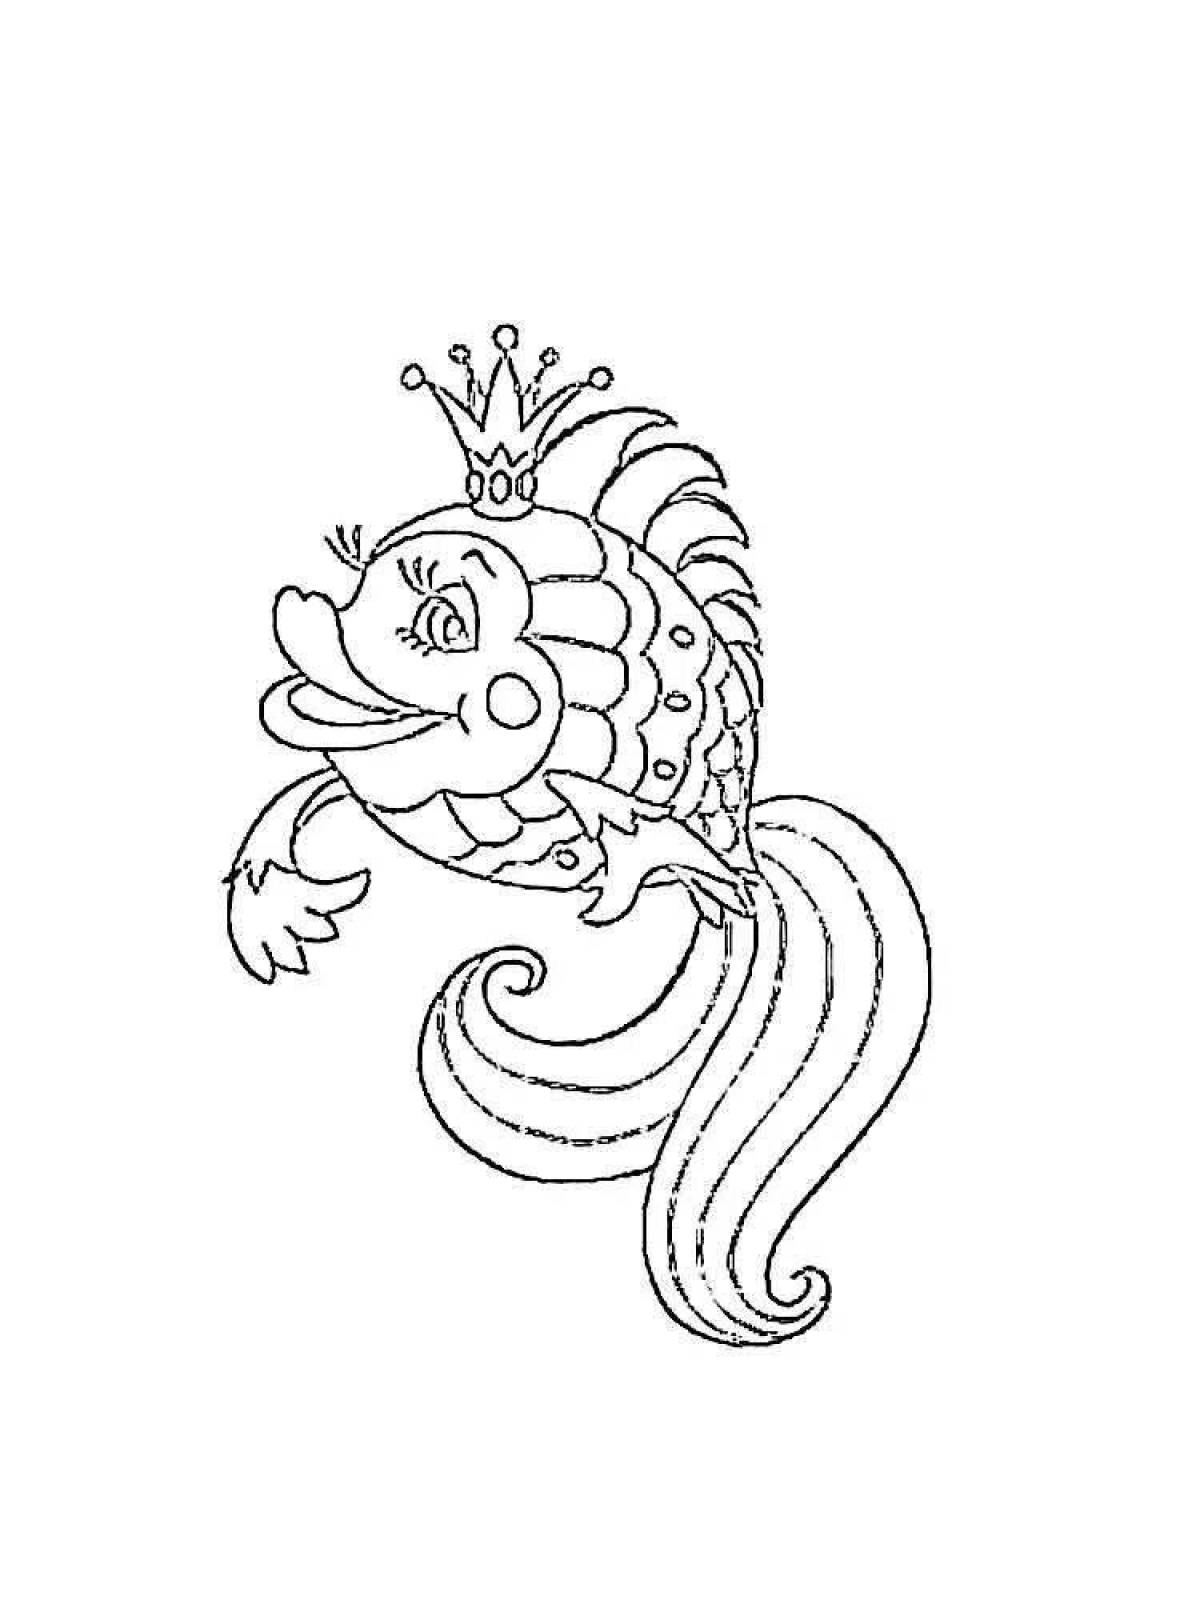 Coloring page the dazzling story of the goldfish